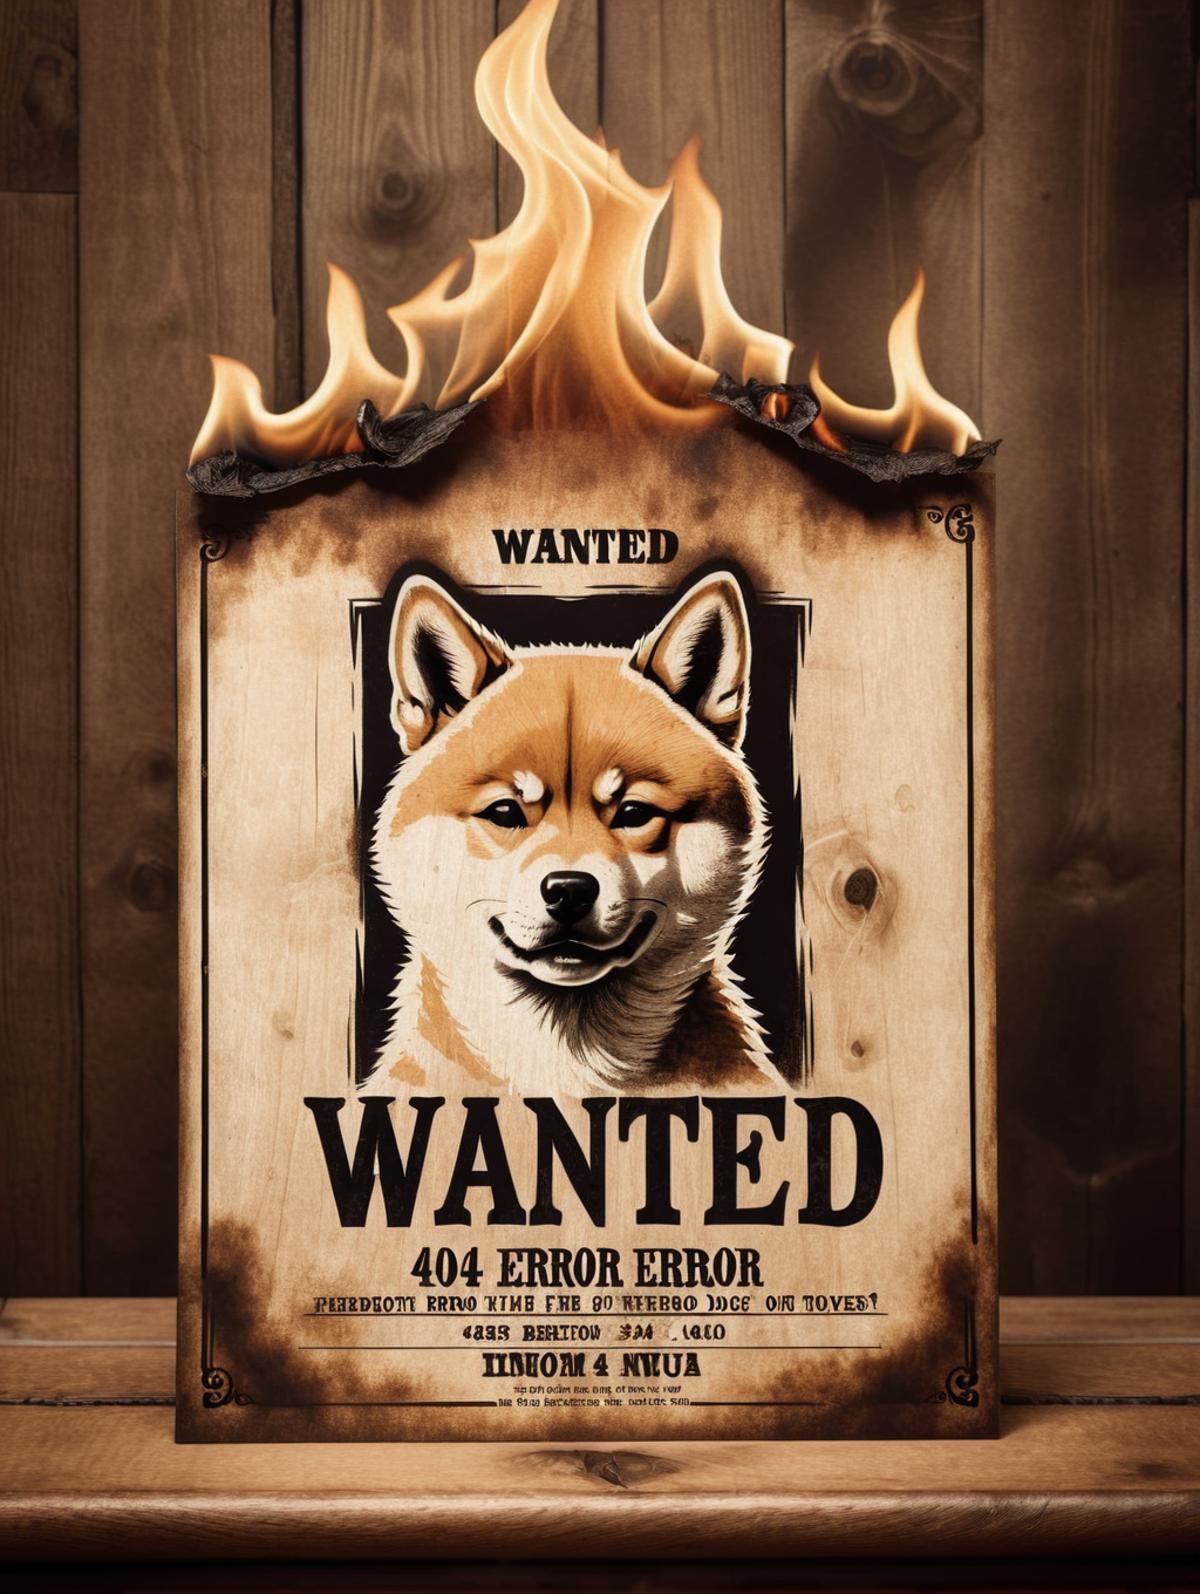 "Wanted" Sign for a 404 Error: A Creative and Humorous Approach